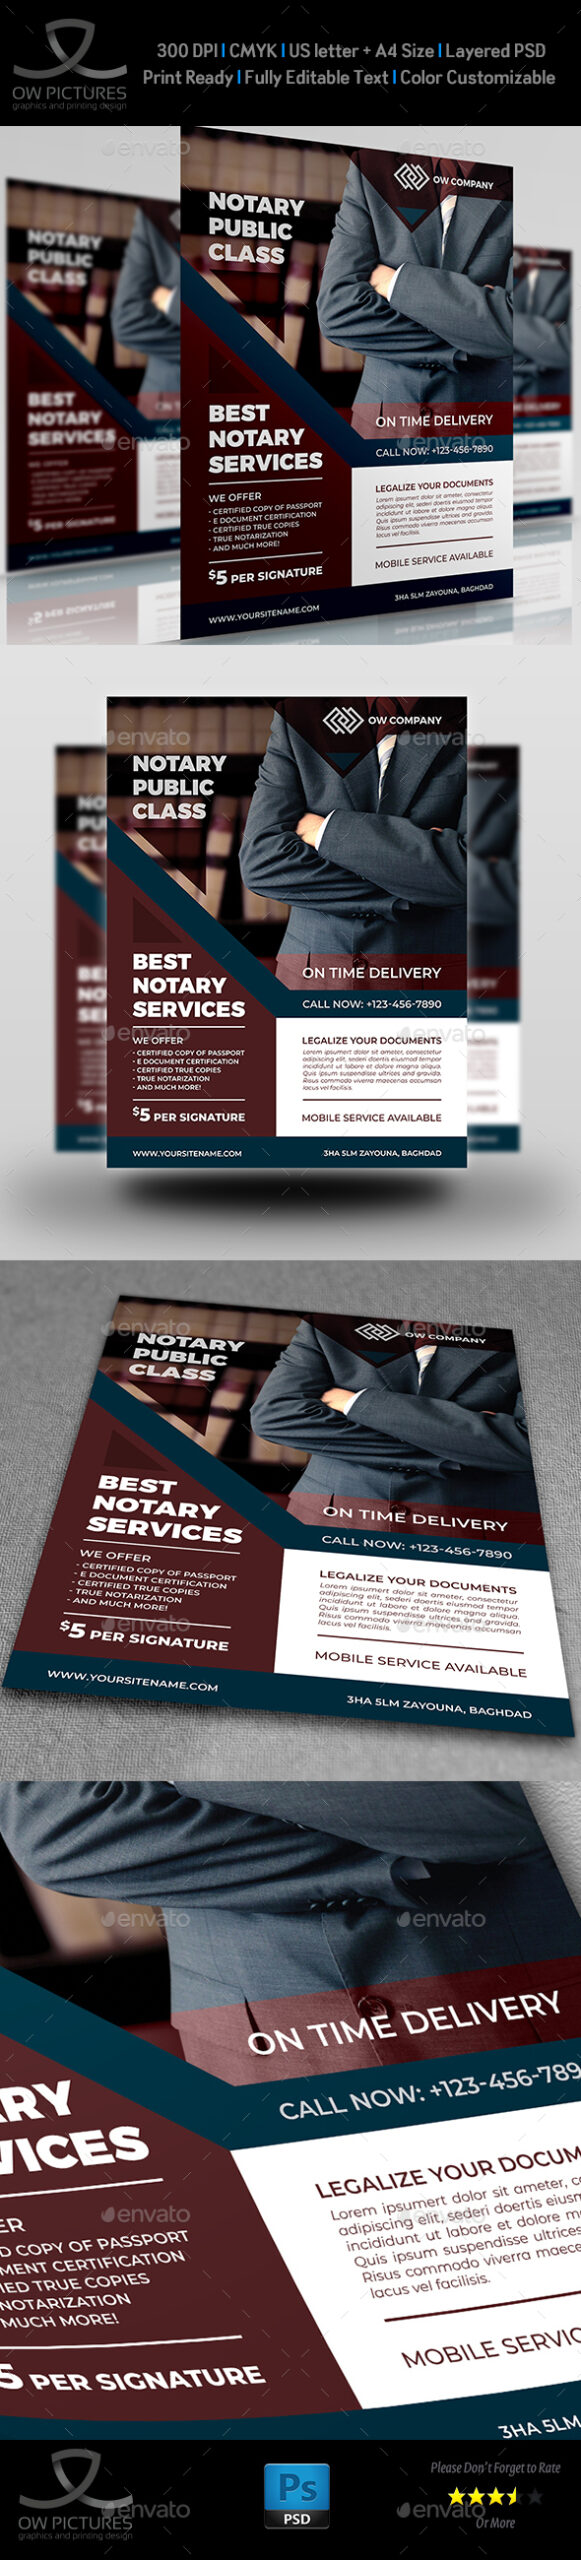 Notary Services Flyer Template For Notary Public Flyer Template For Notary Public Flyer Template